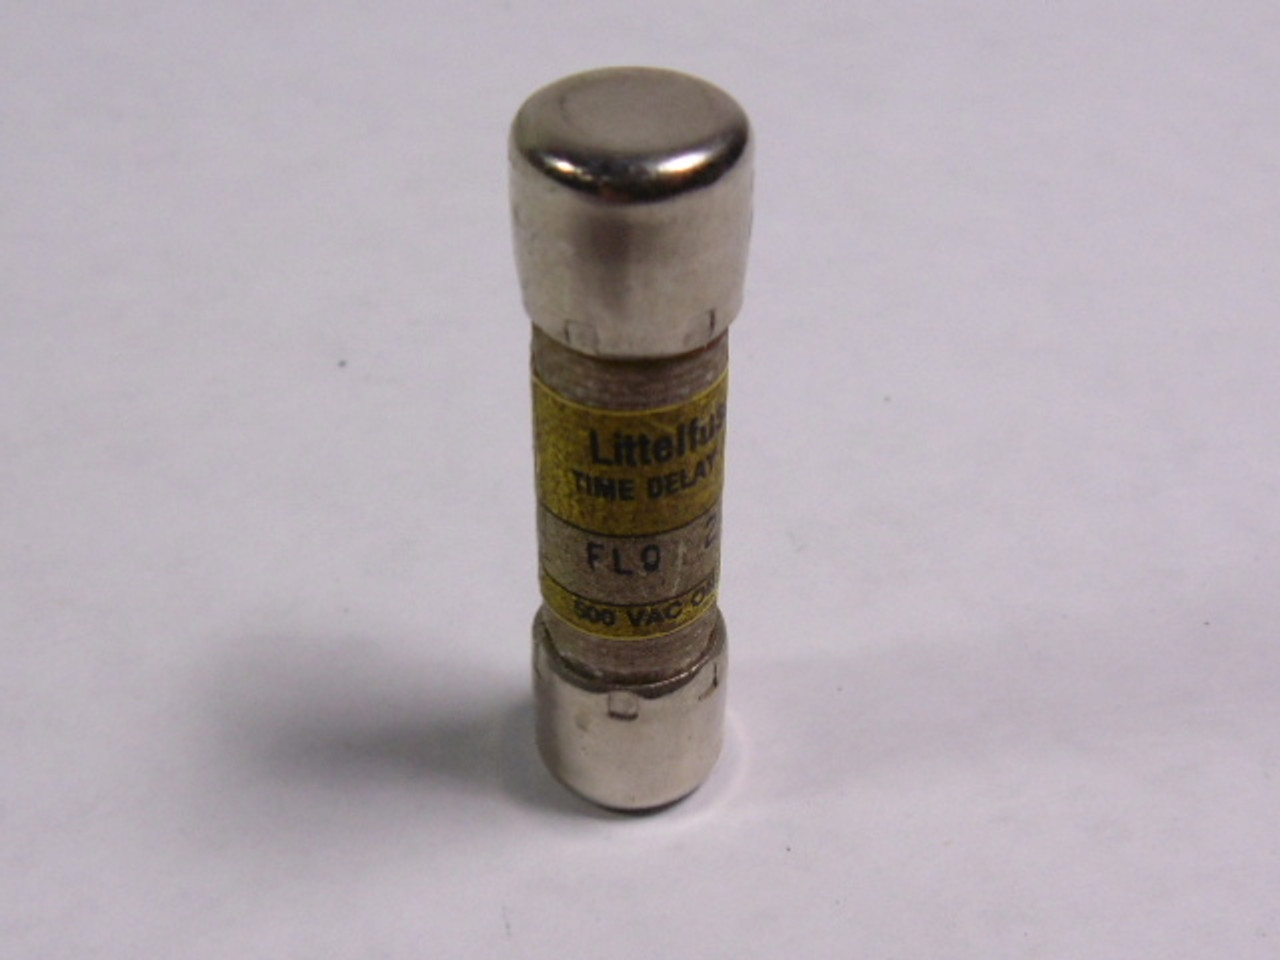 Littelfuse FLQ-25 Time Delay Fuse 25A 500V USED